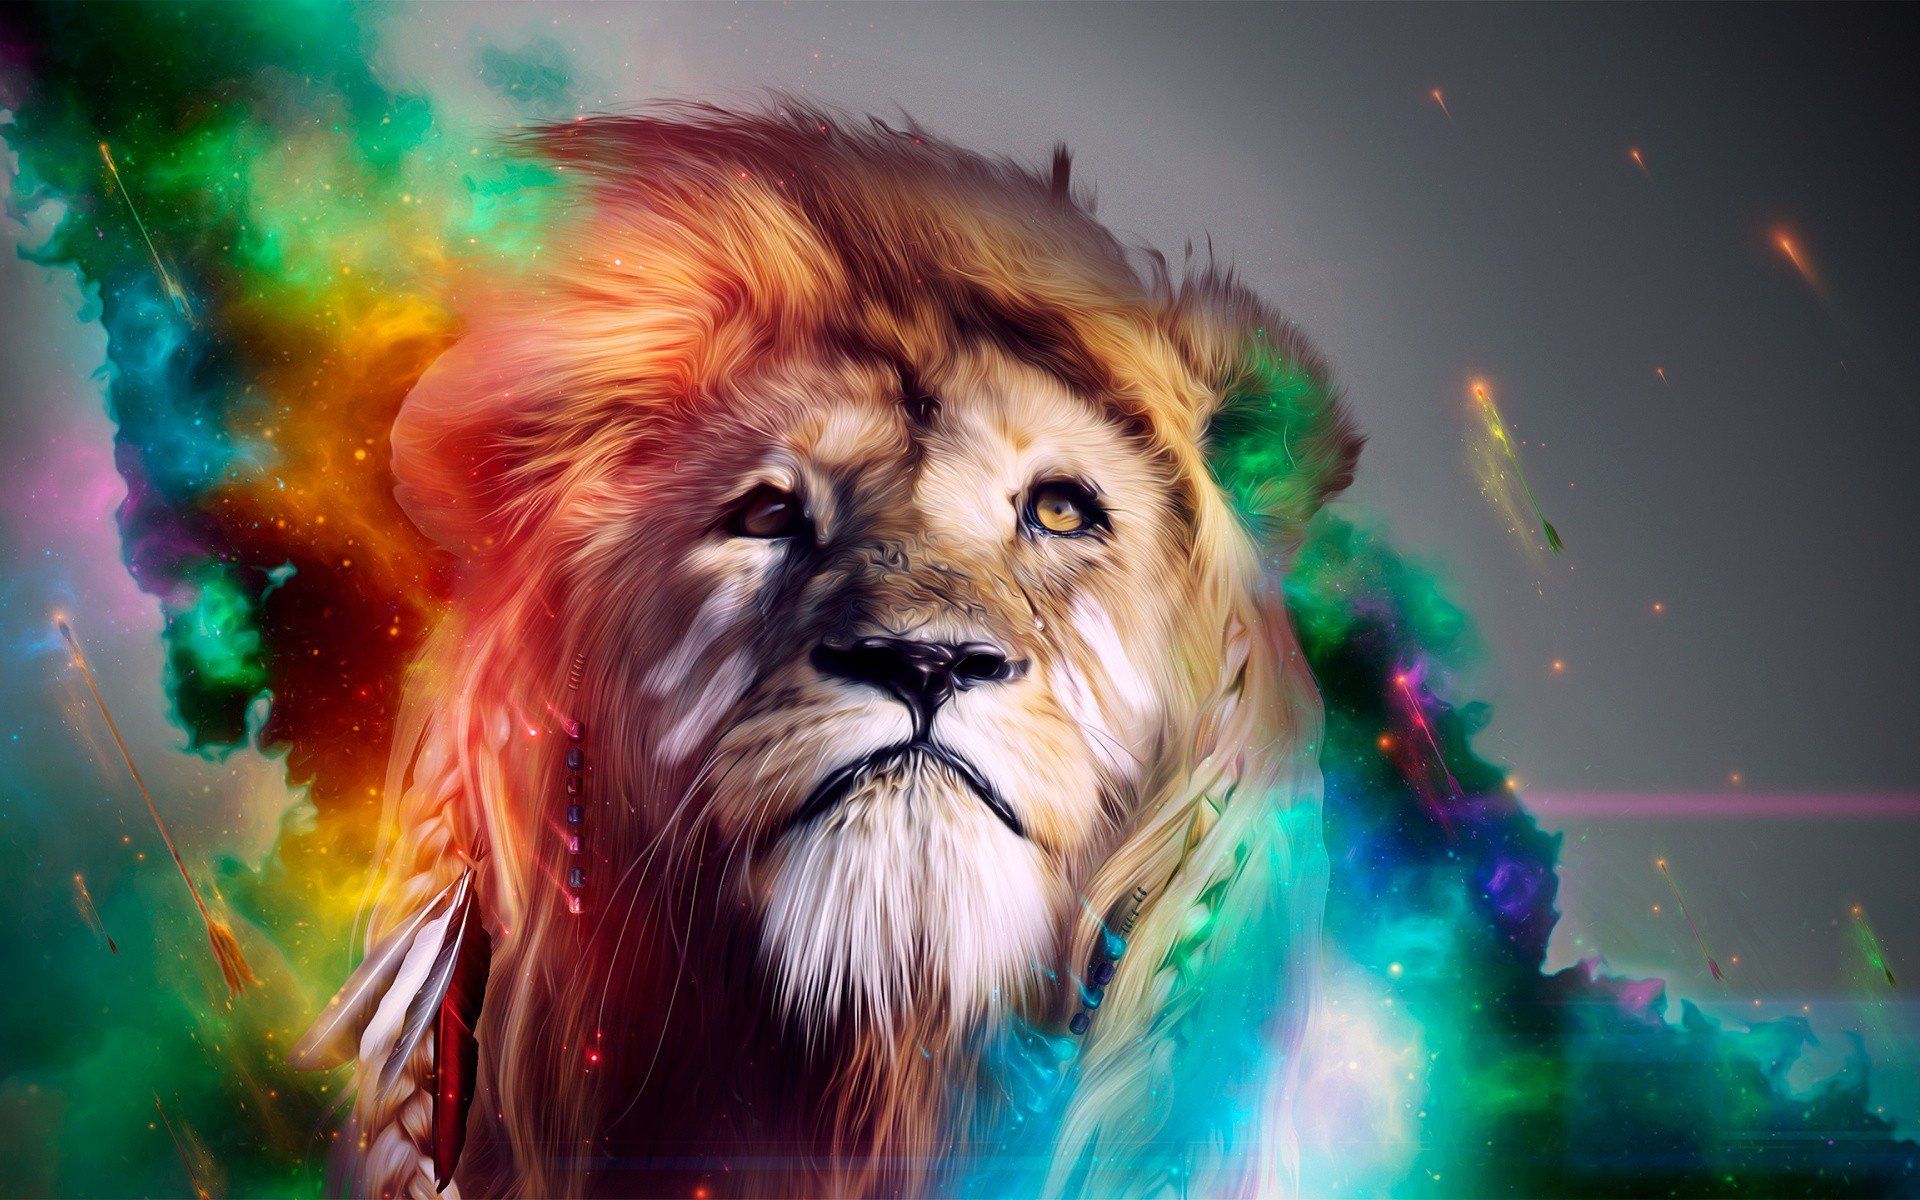 1400x1050 Lion Abstract 4k 1400x1050 Resolution HD 4k Wallpapers